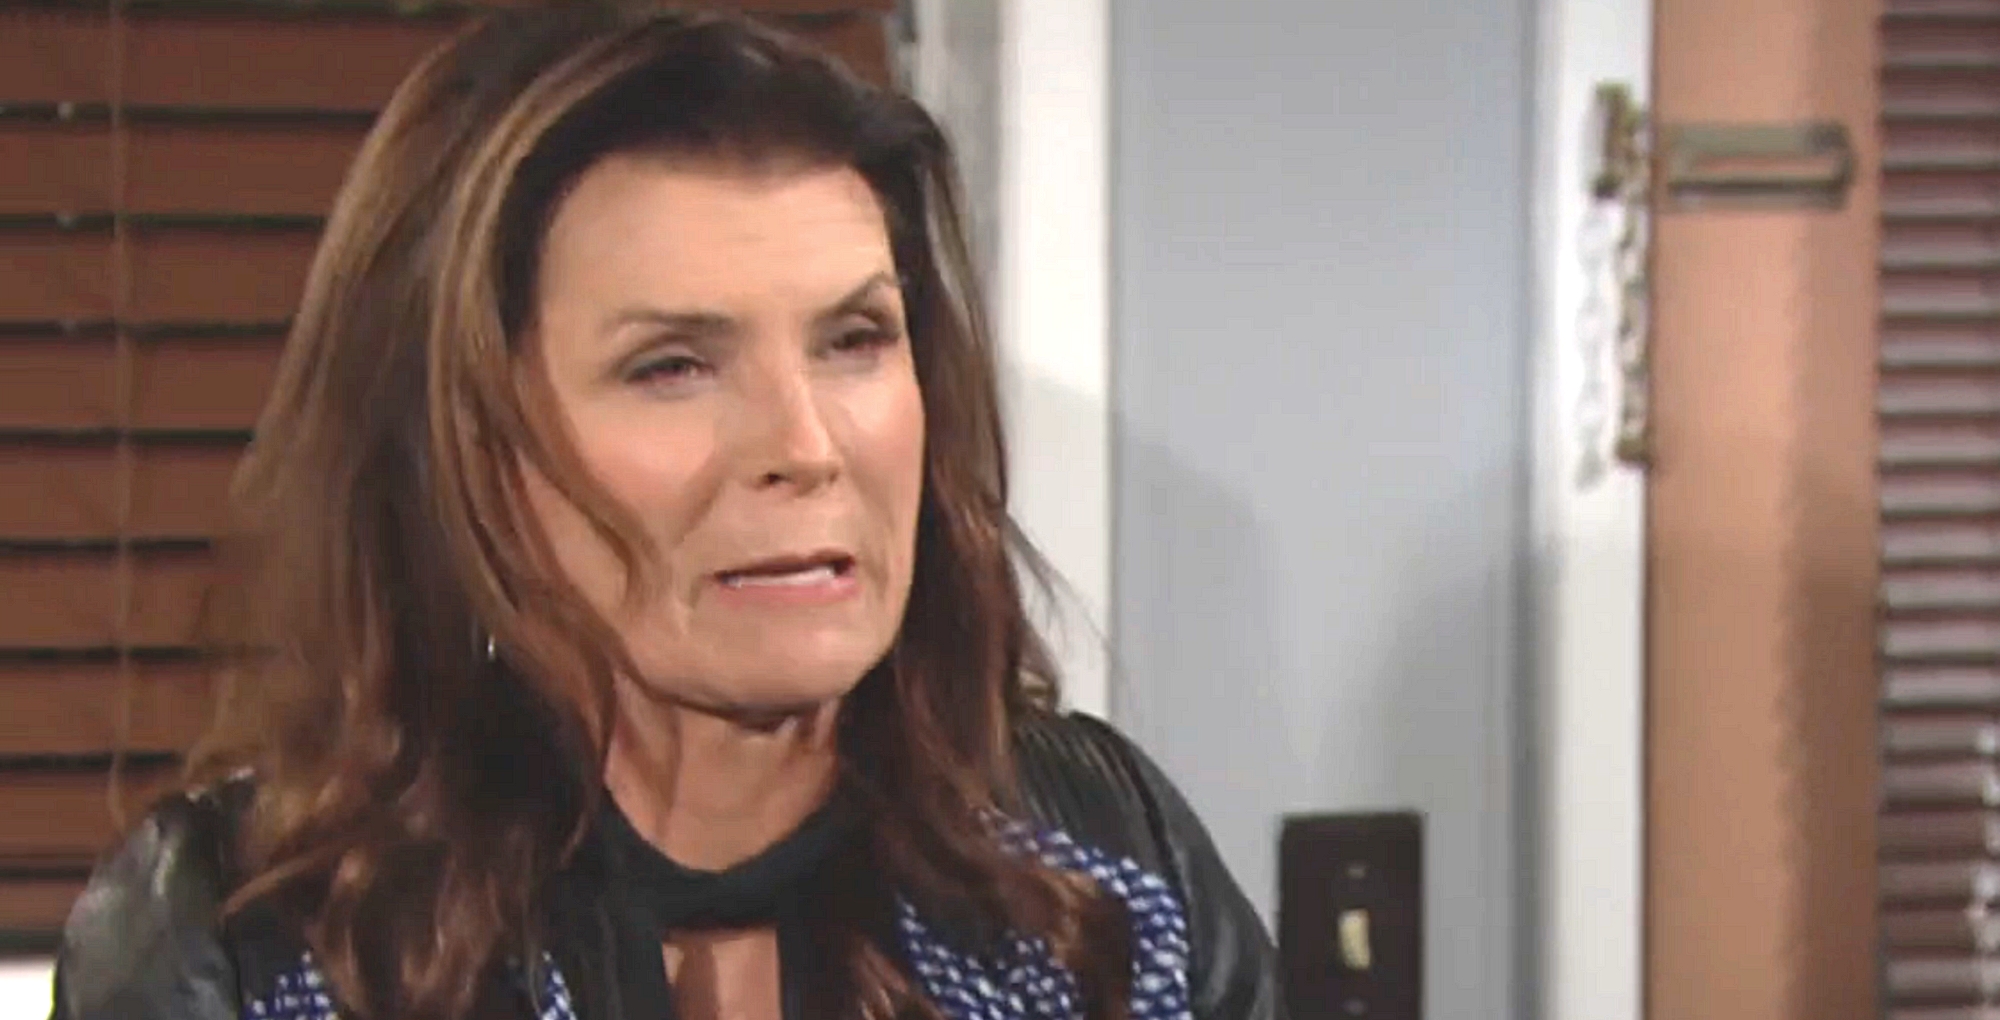 the bold and the beautiful recap for wednesday, march 29, 2023, a blubbering sheila carter